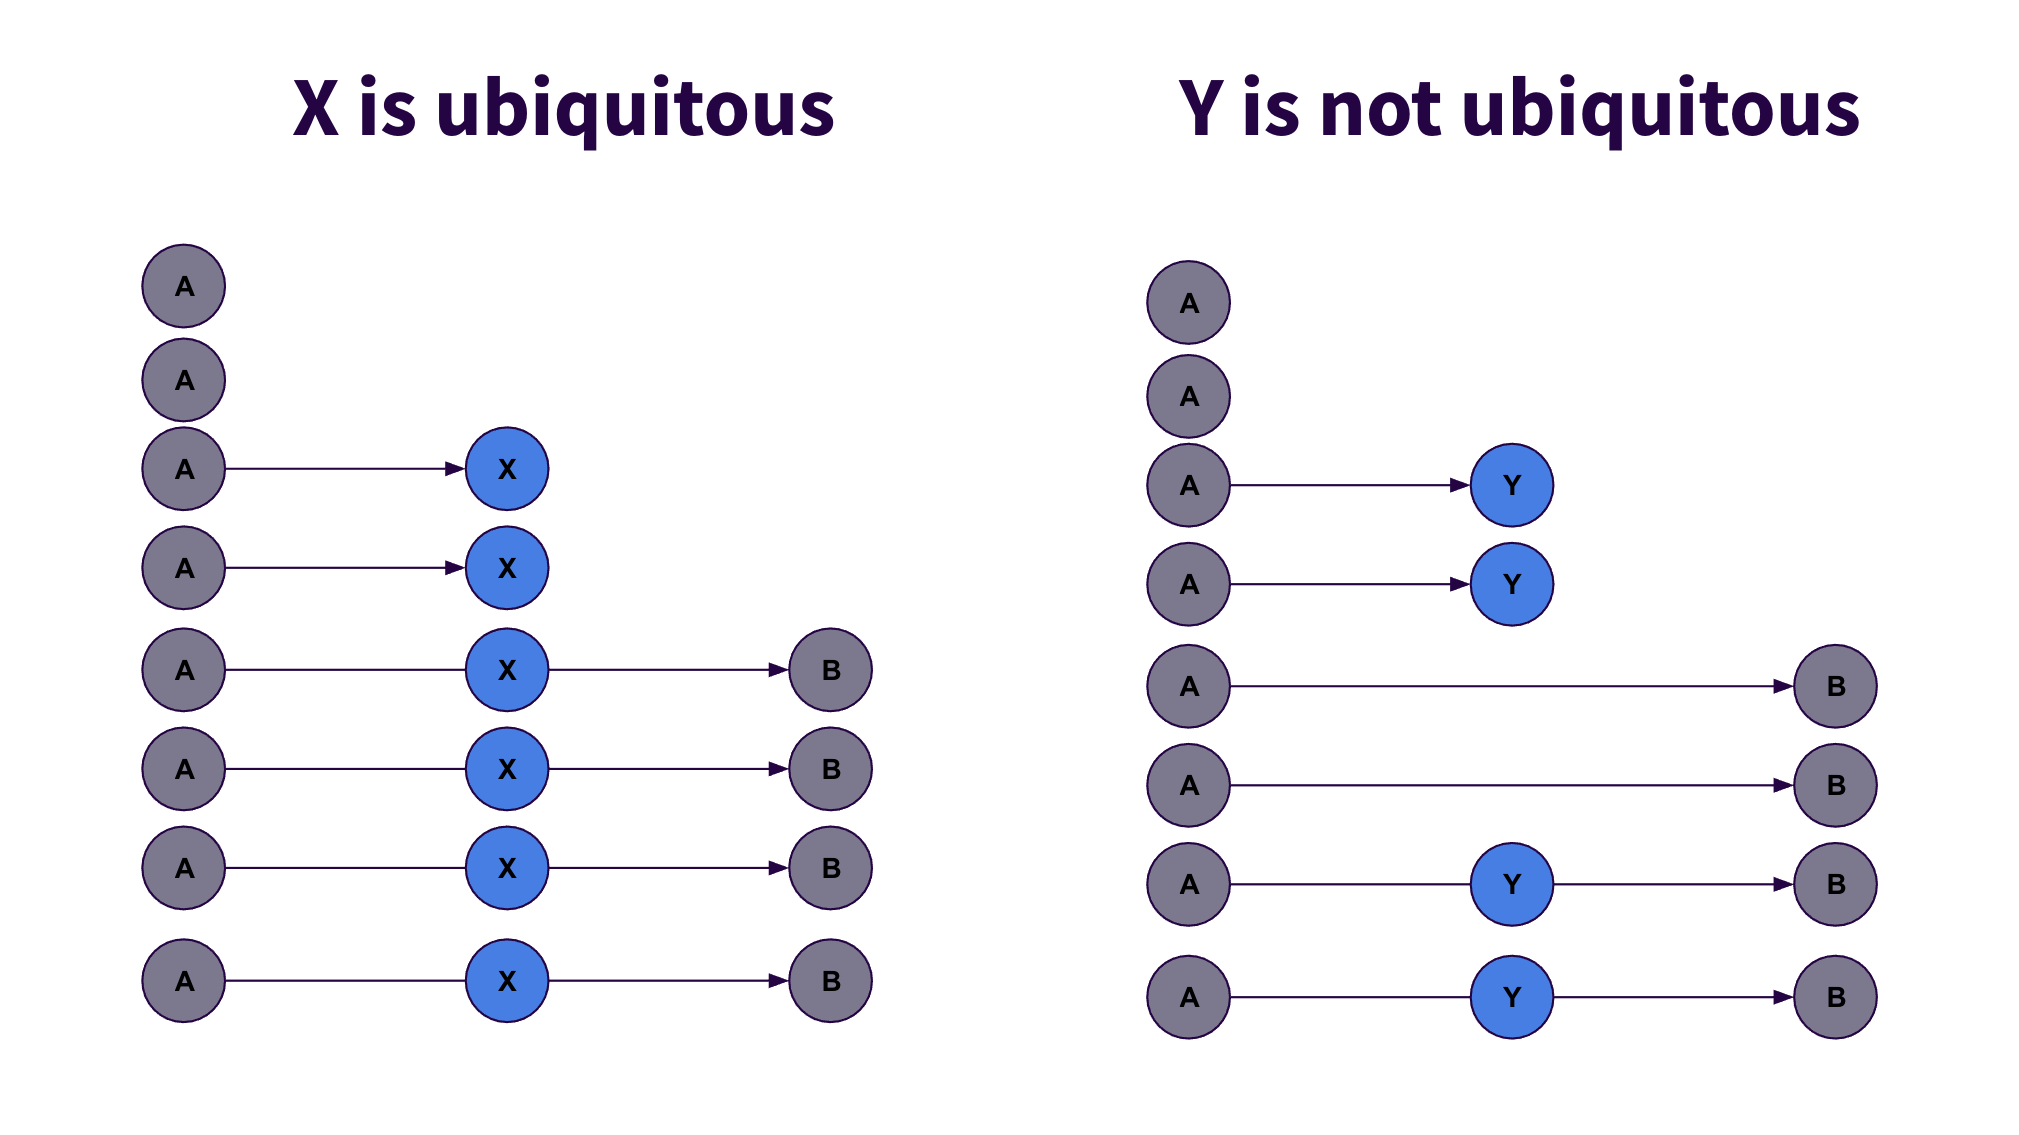 Funnel results when X is ubiquitous and Y is not ubiquitous